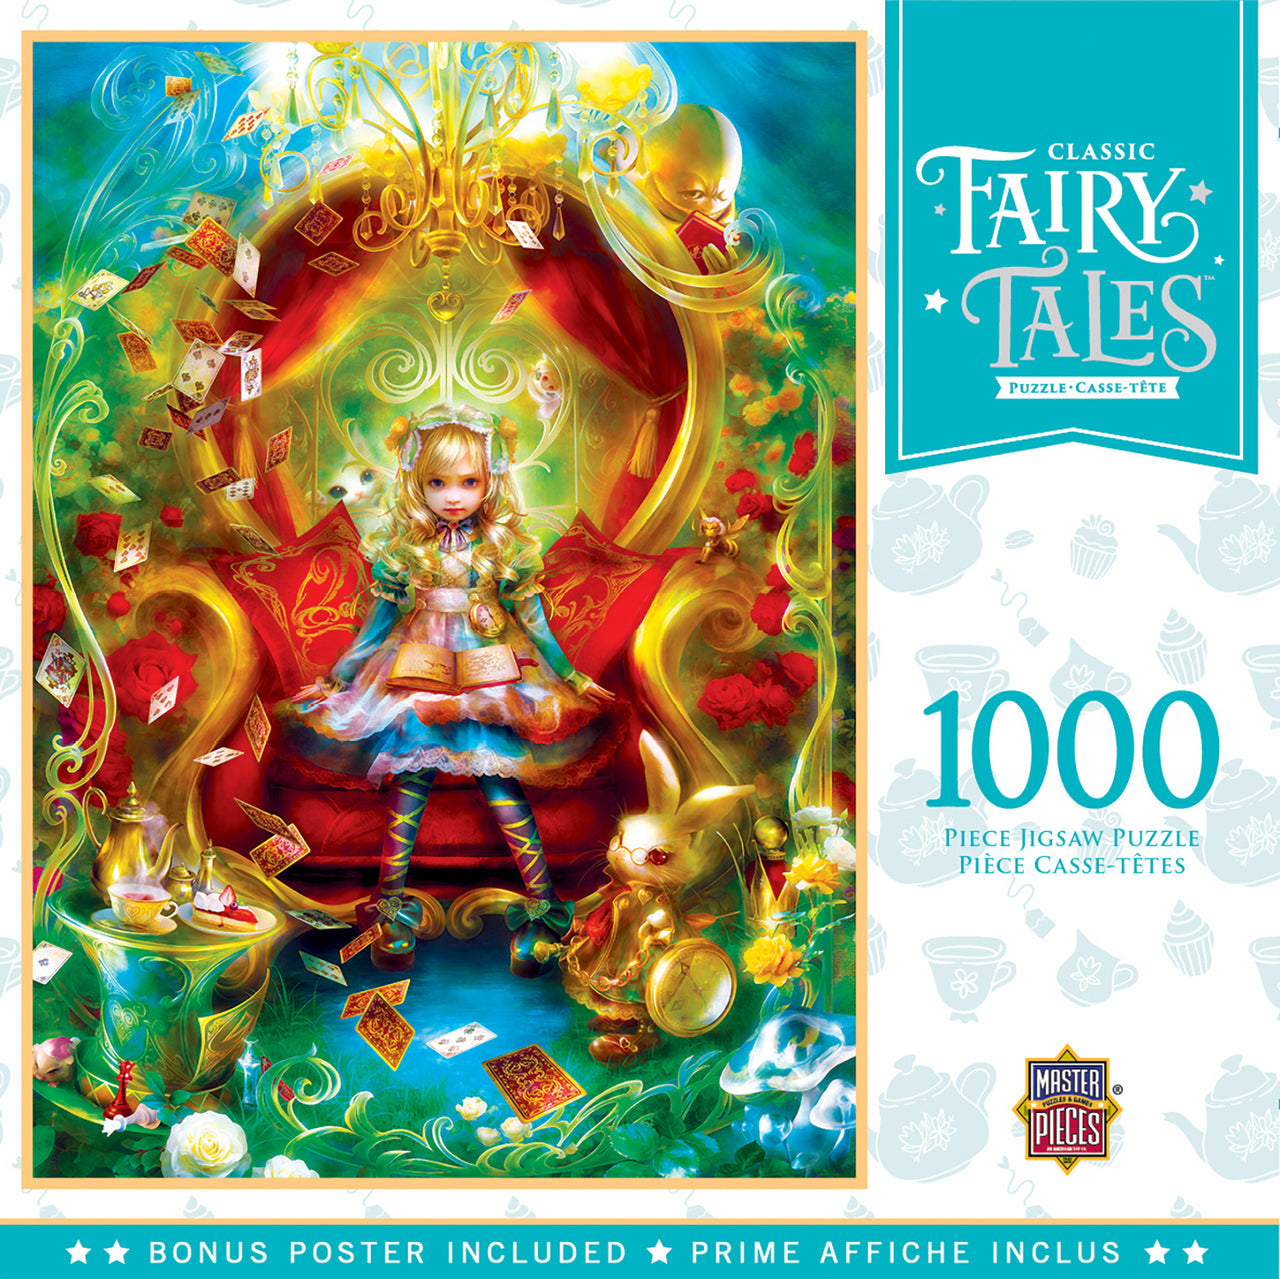 Classic Fairy Tales - Tea Party Time af Shu, 1000 brikker puslespil